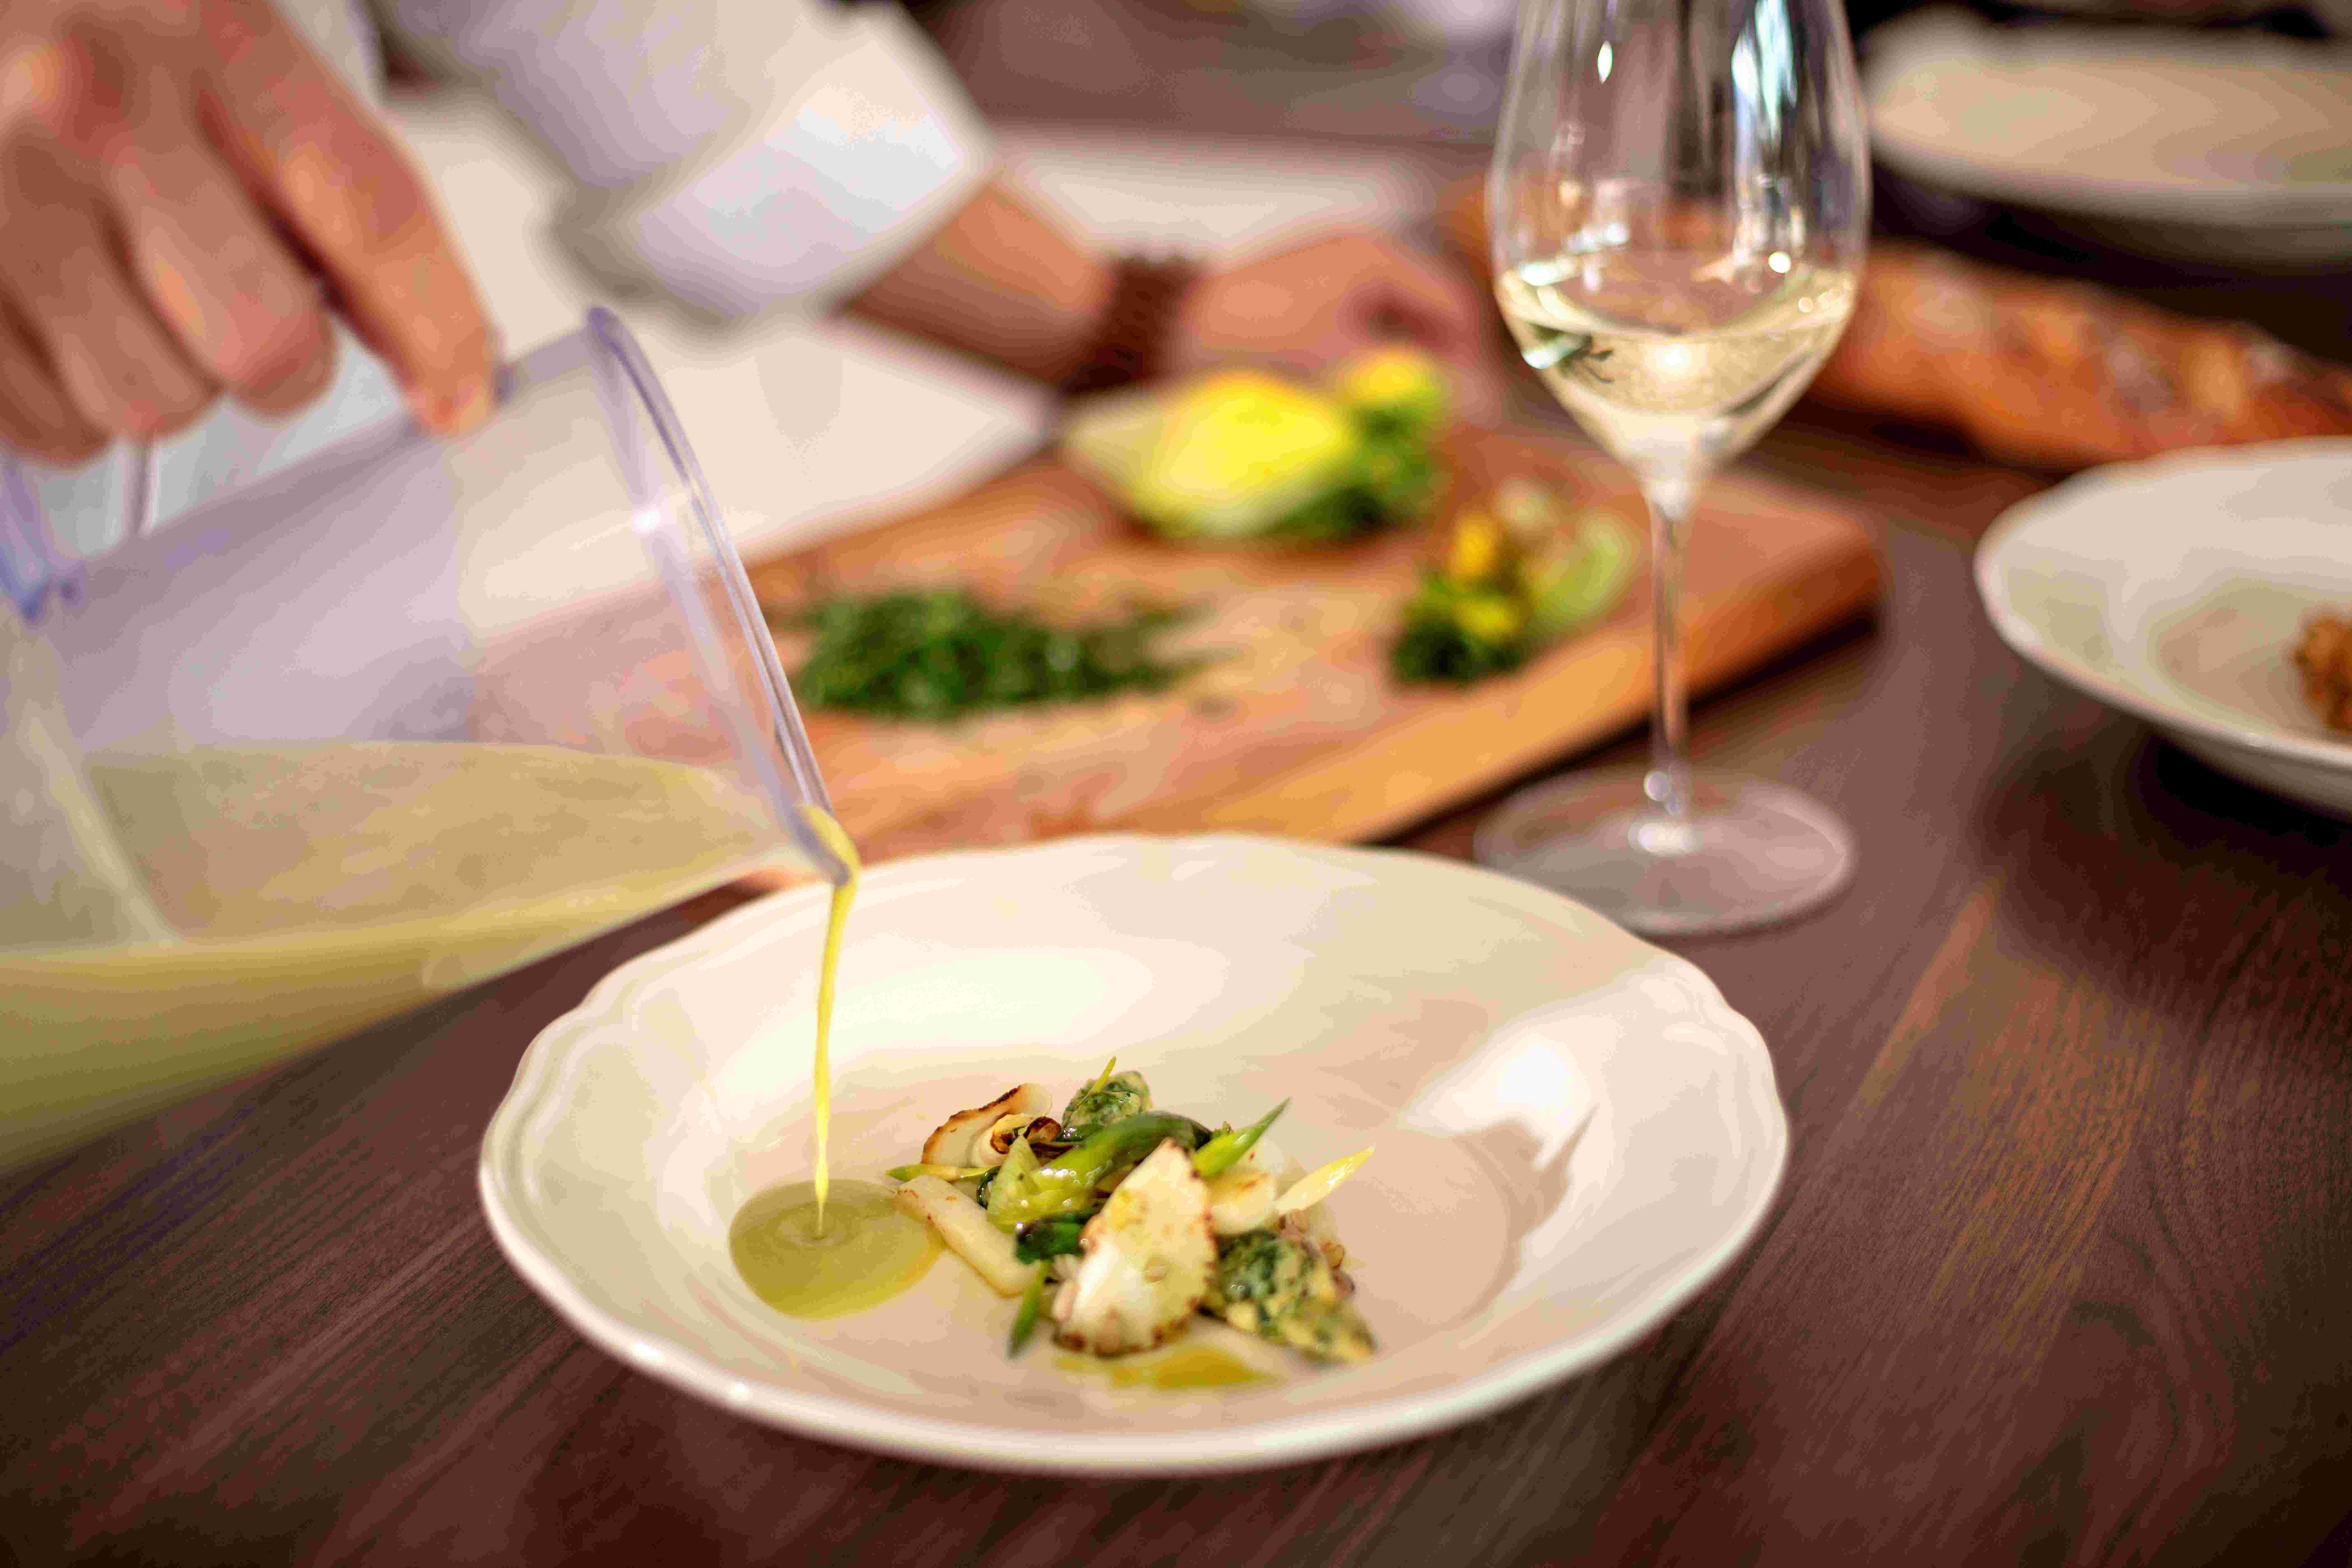 Furmint in the glass, Furmint on the plate: the variety’s role in gastronomy